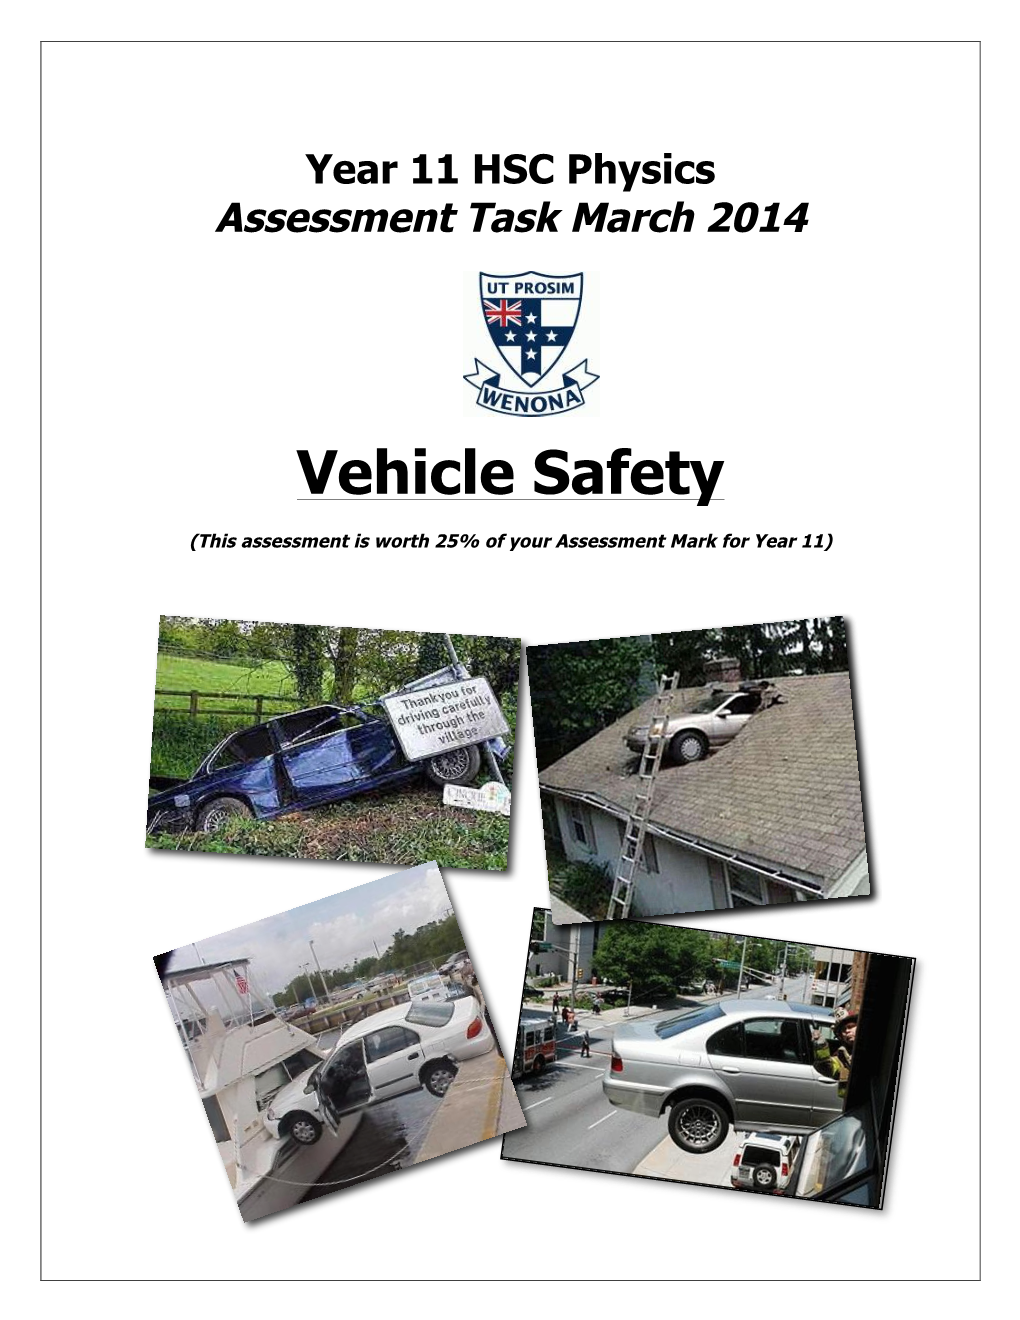 Vehicle Safety Assessment 2014